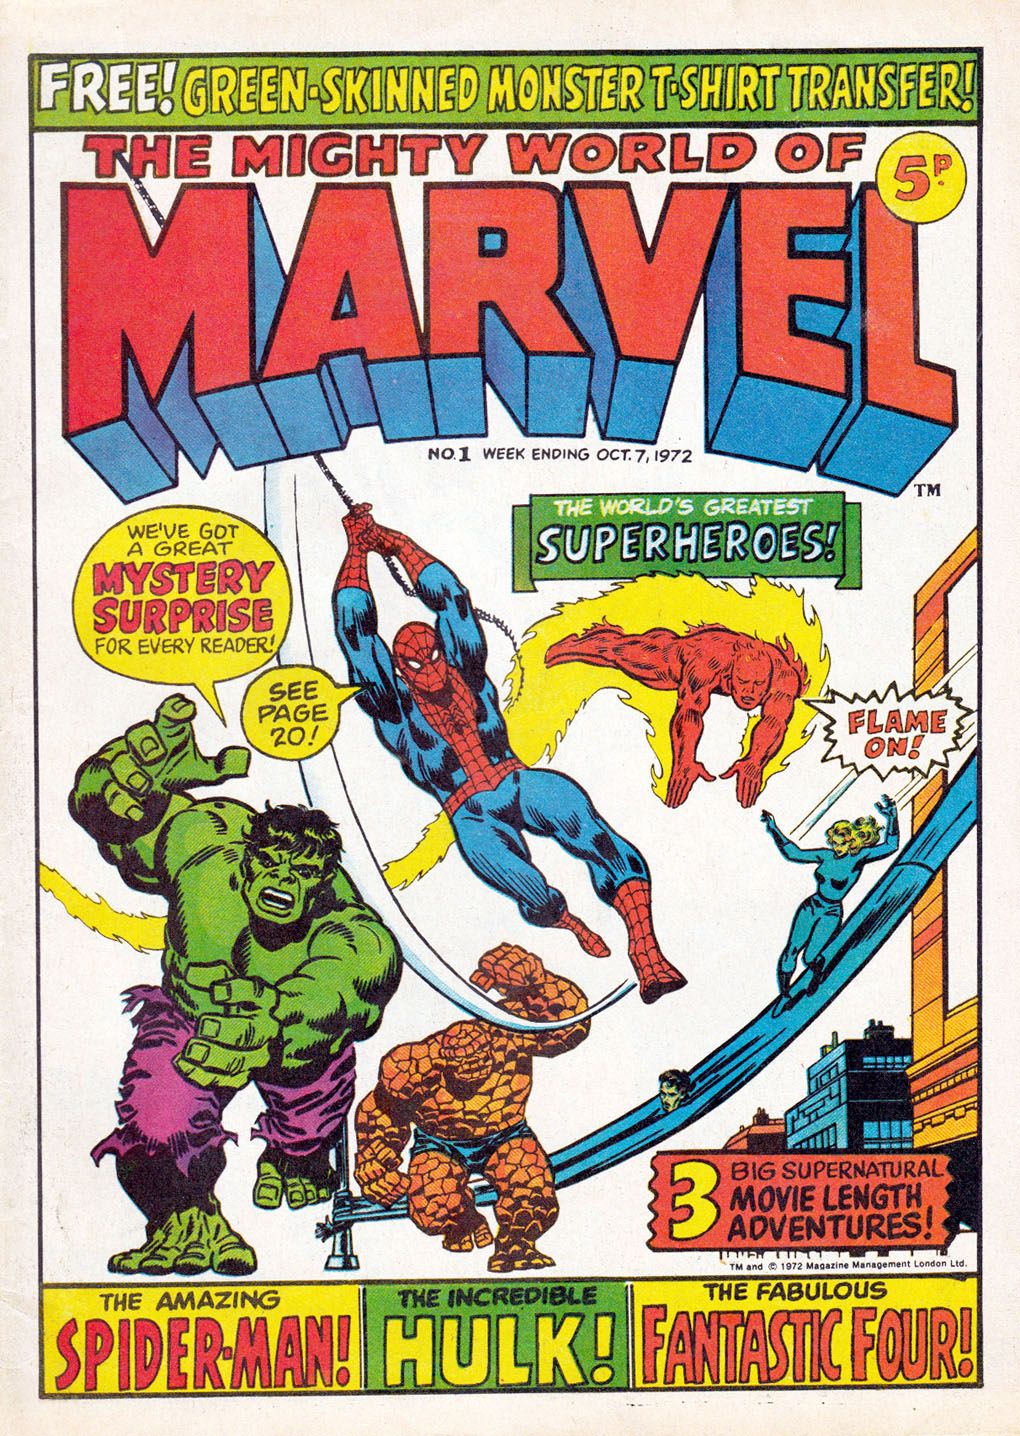 The Mighty World of Marvel: The History of Marvel UK Comics